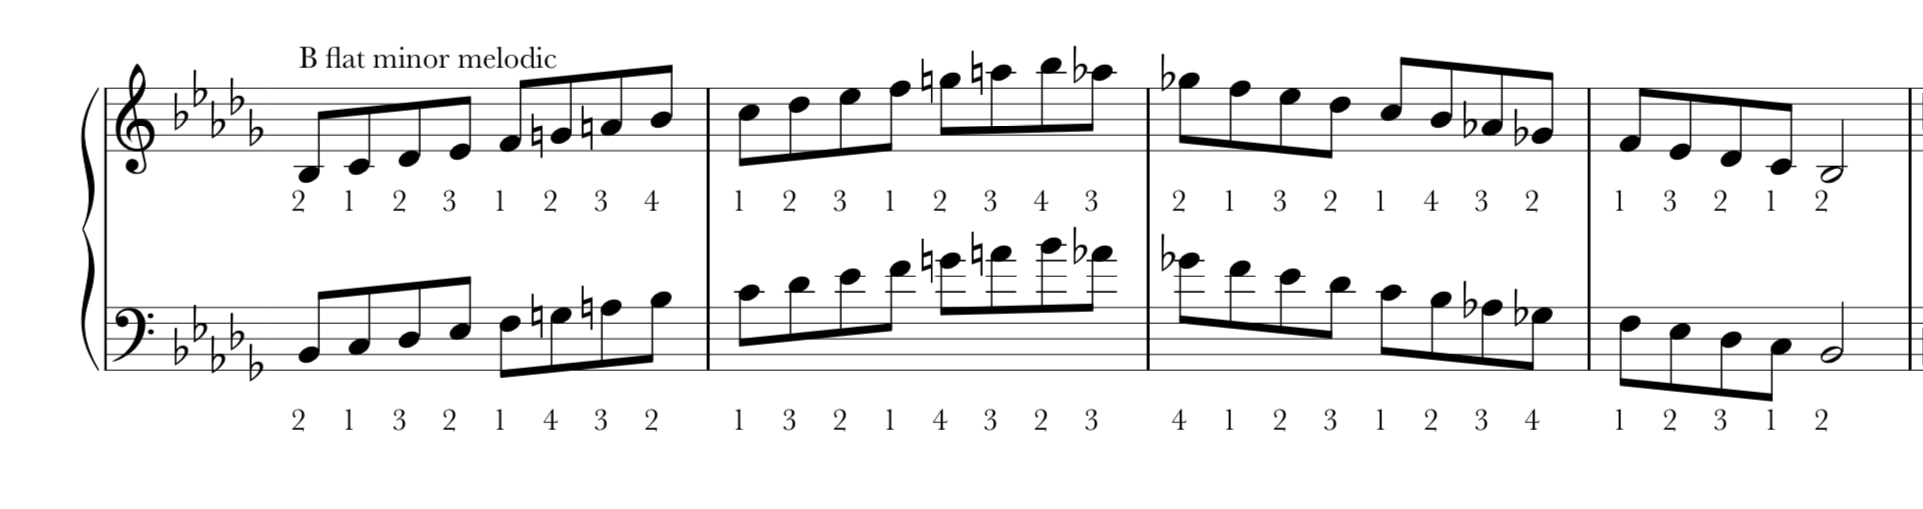 b flat melodic minor scale ascending and descending